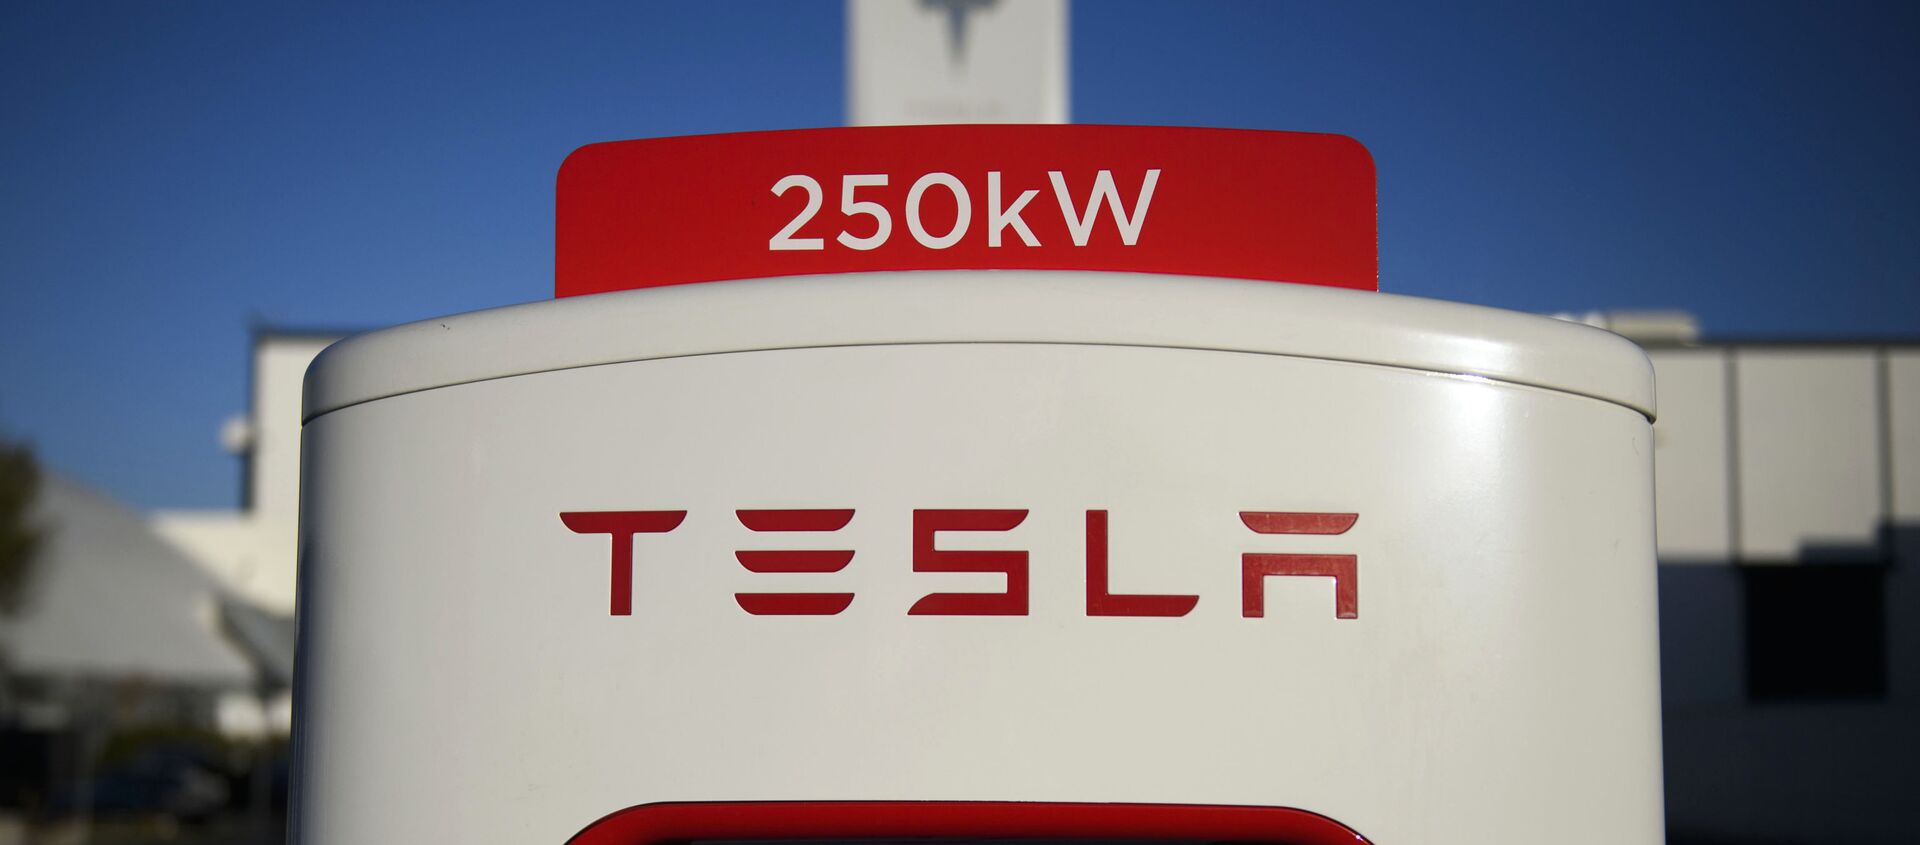 (FILES) In this file photo a Tesla logo is seen on a 250kW electric vehicle charging station at the Tesla Inc. supercharger station on January 4, 2021 in Hawthorne, California. - Sputnik International, 1920, 13.01.2021